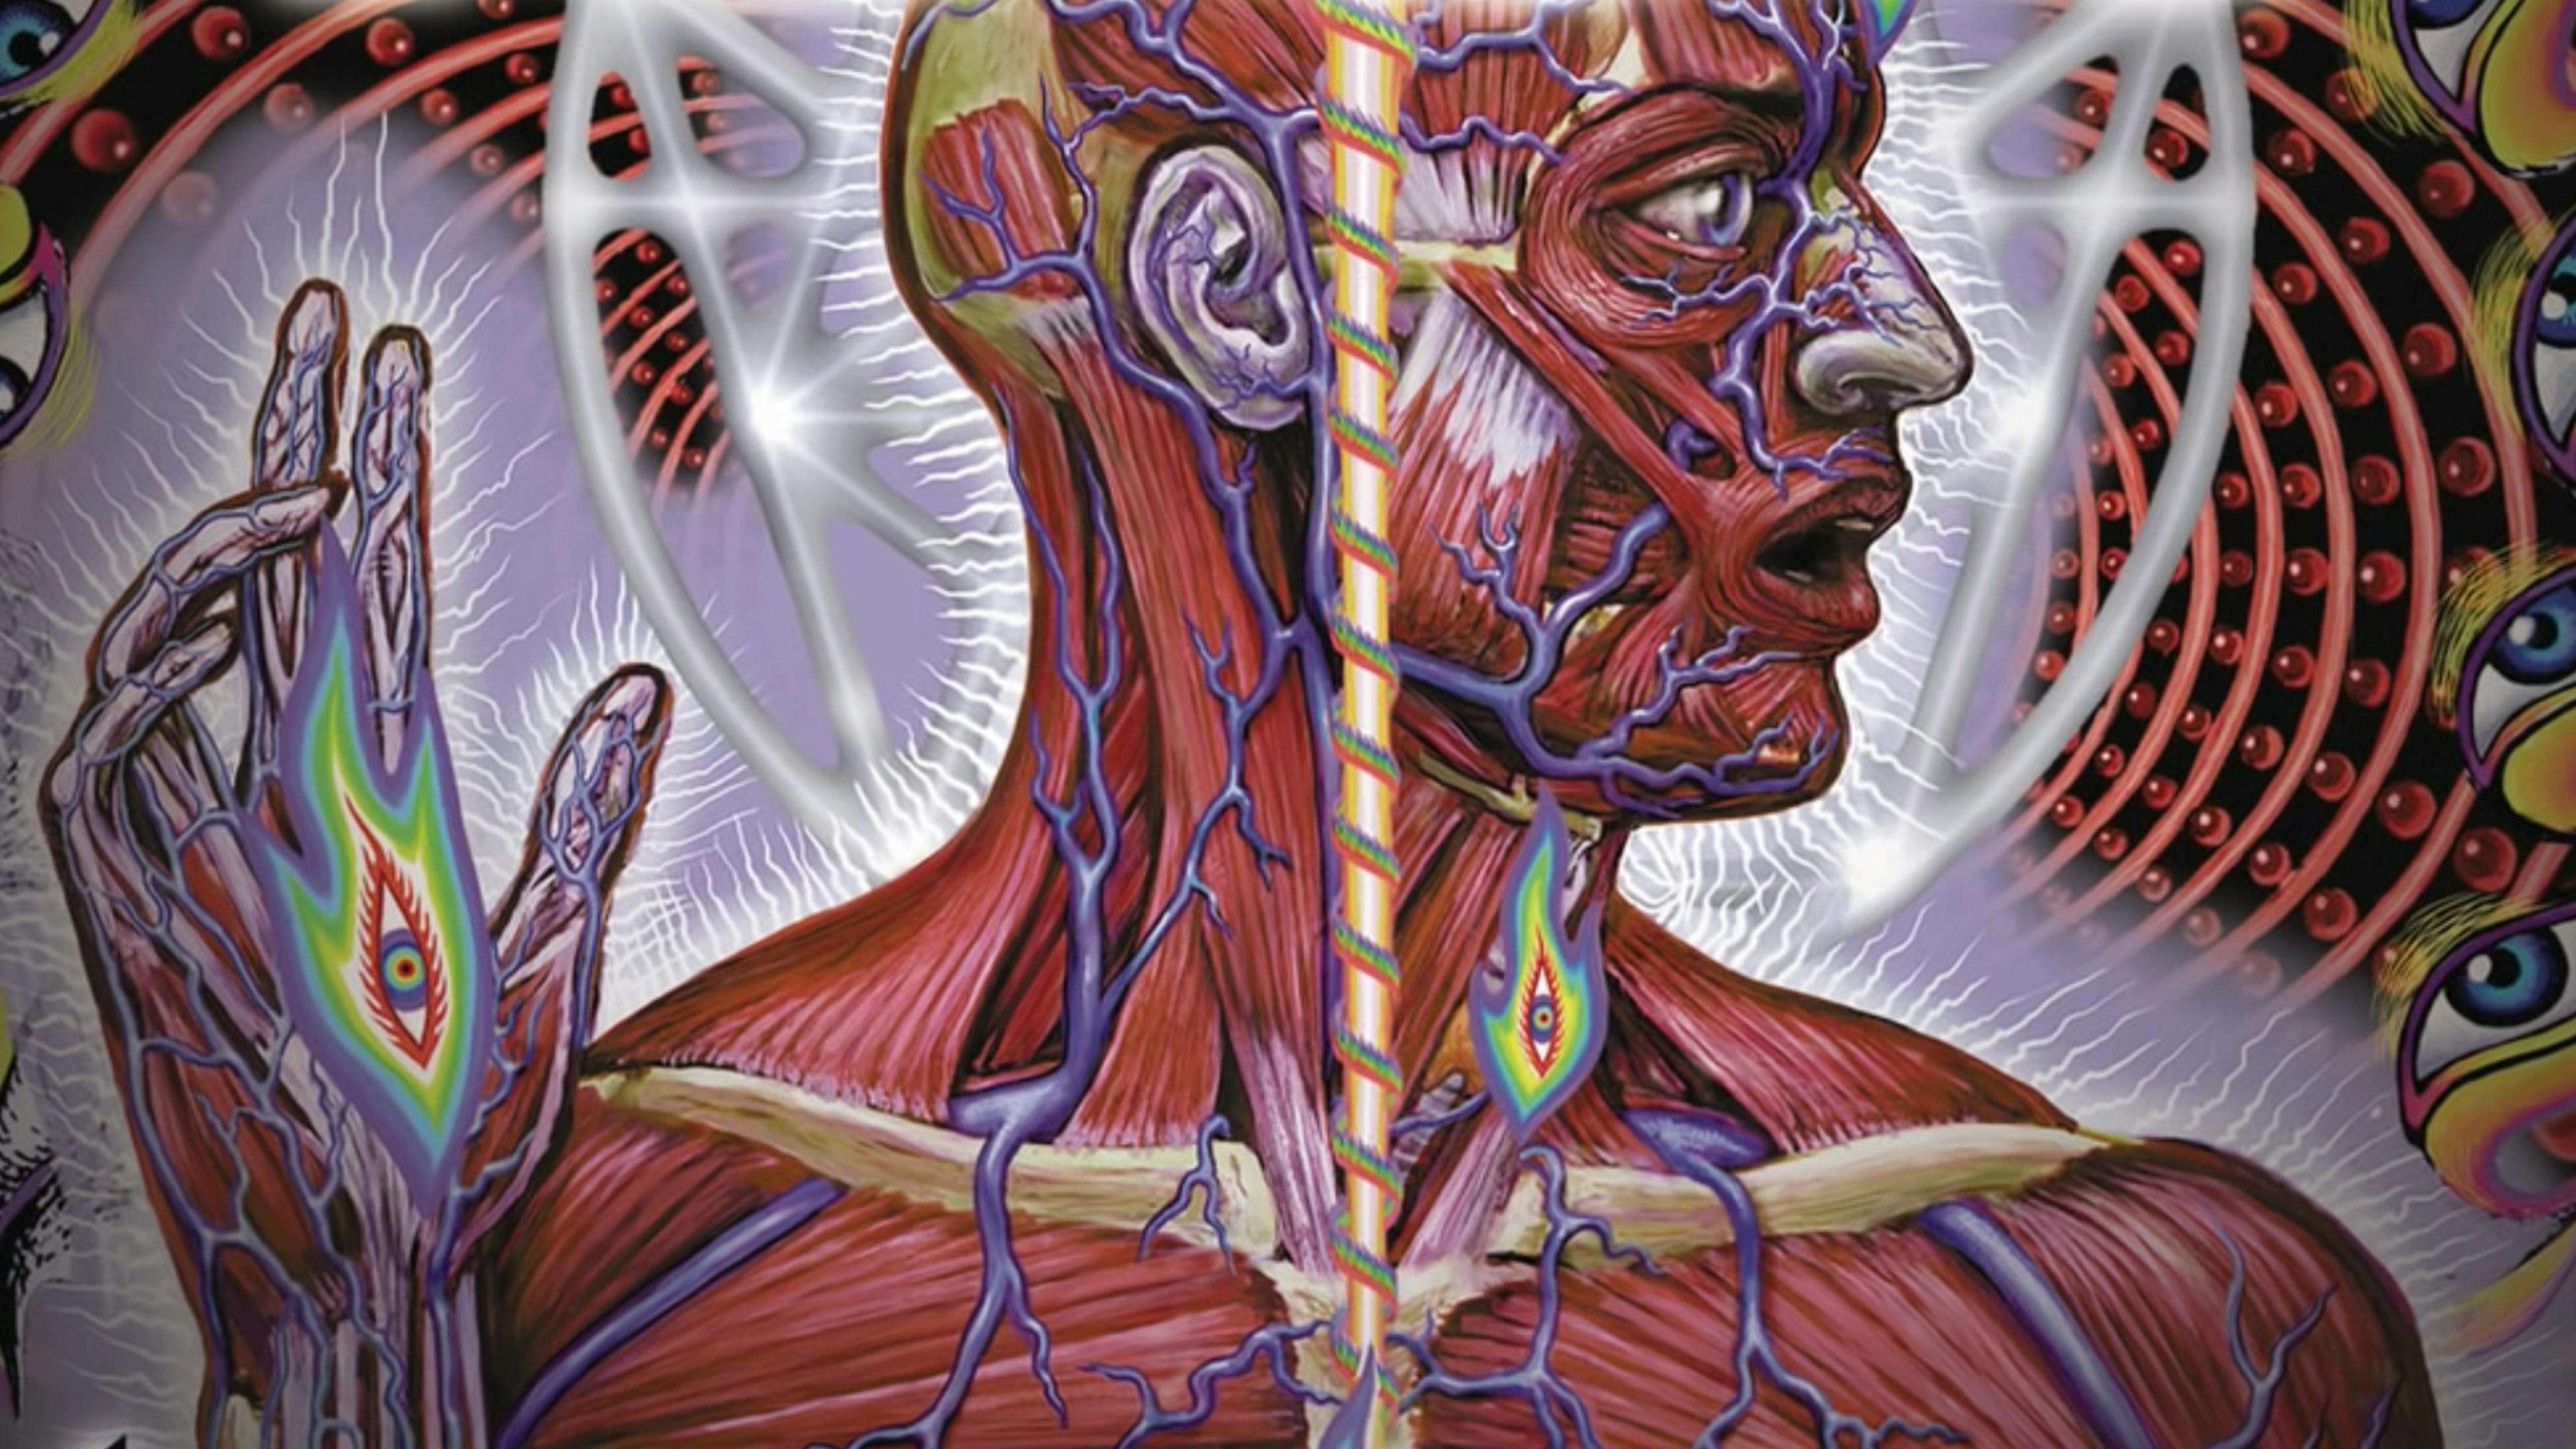 “One of the greatest albums you’ll hear this lifetime”: Our original 2001 review of Tool’s Lateralus